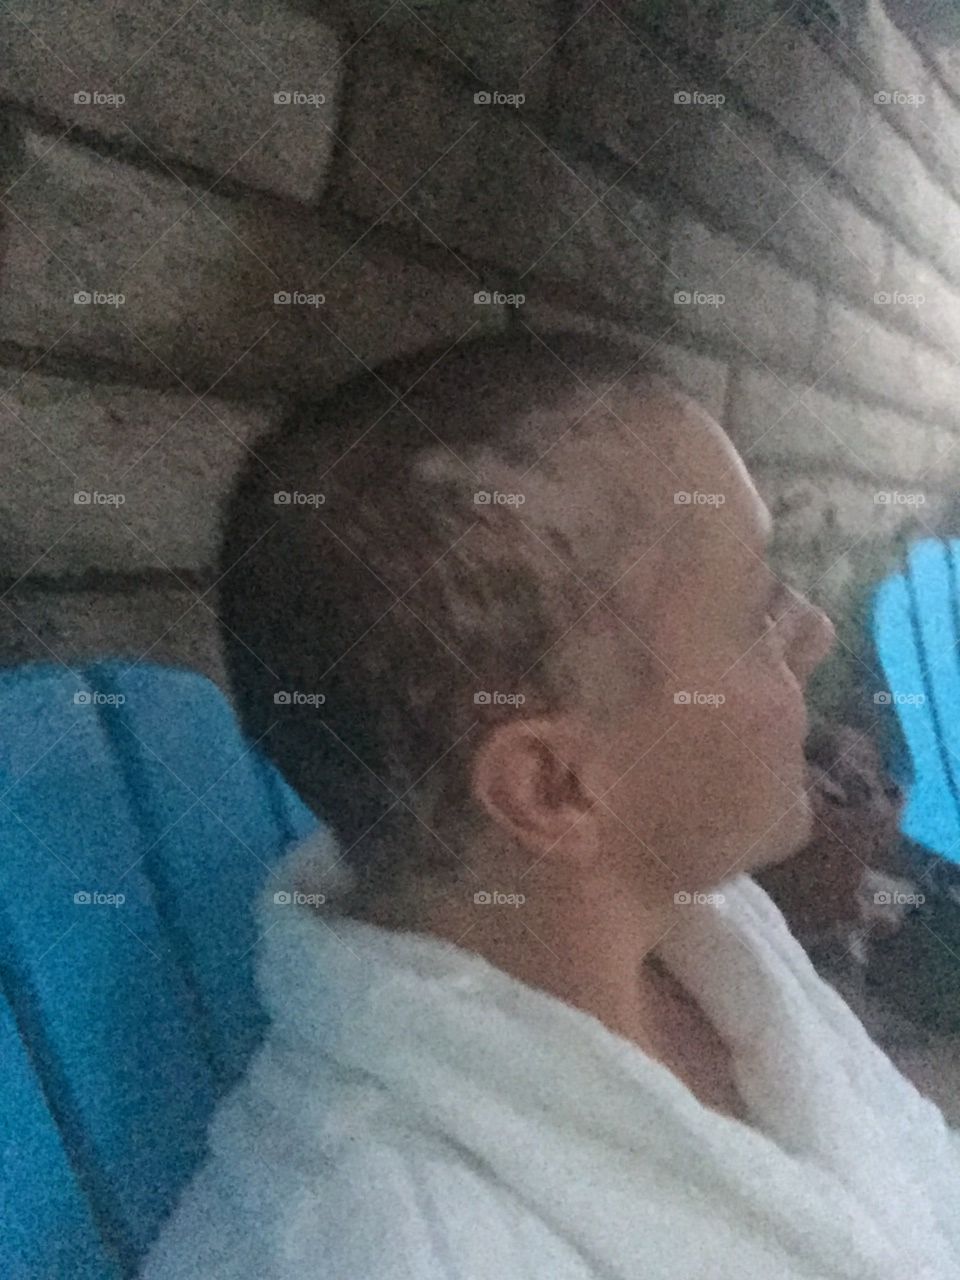 Hair coming out after chemo